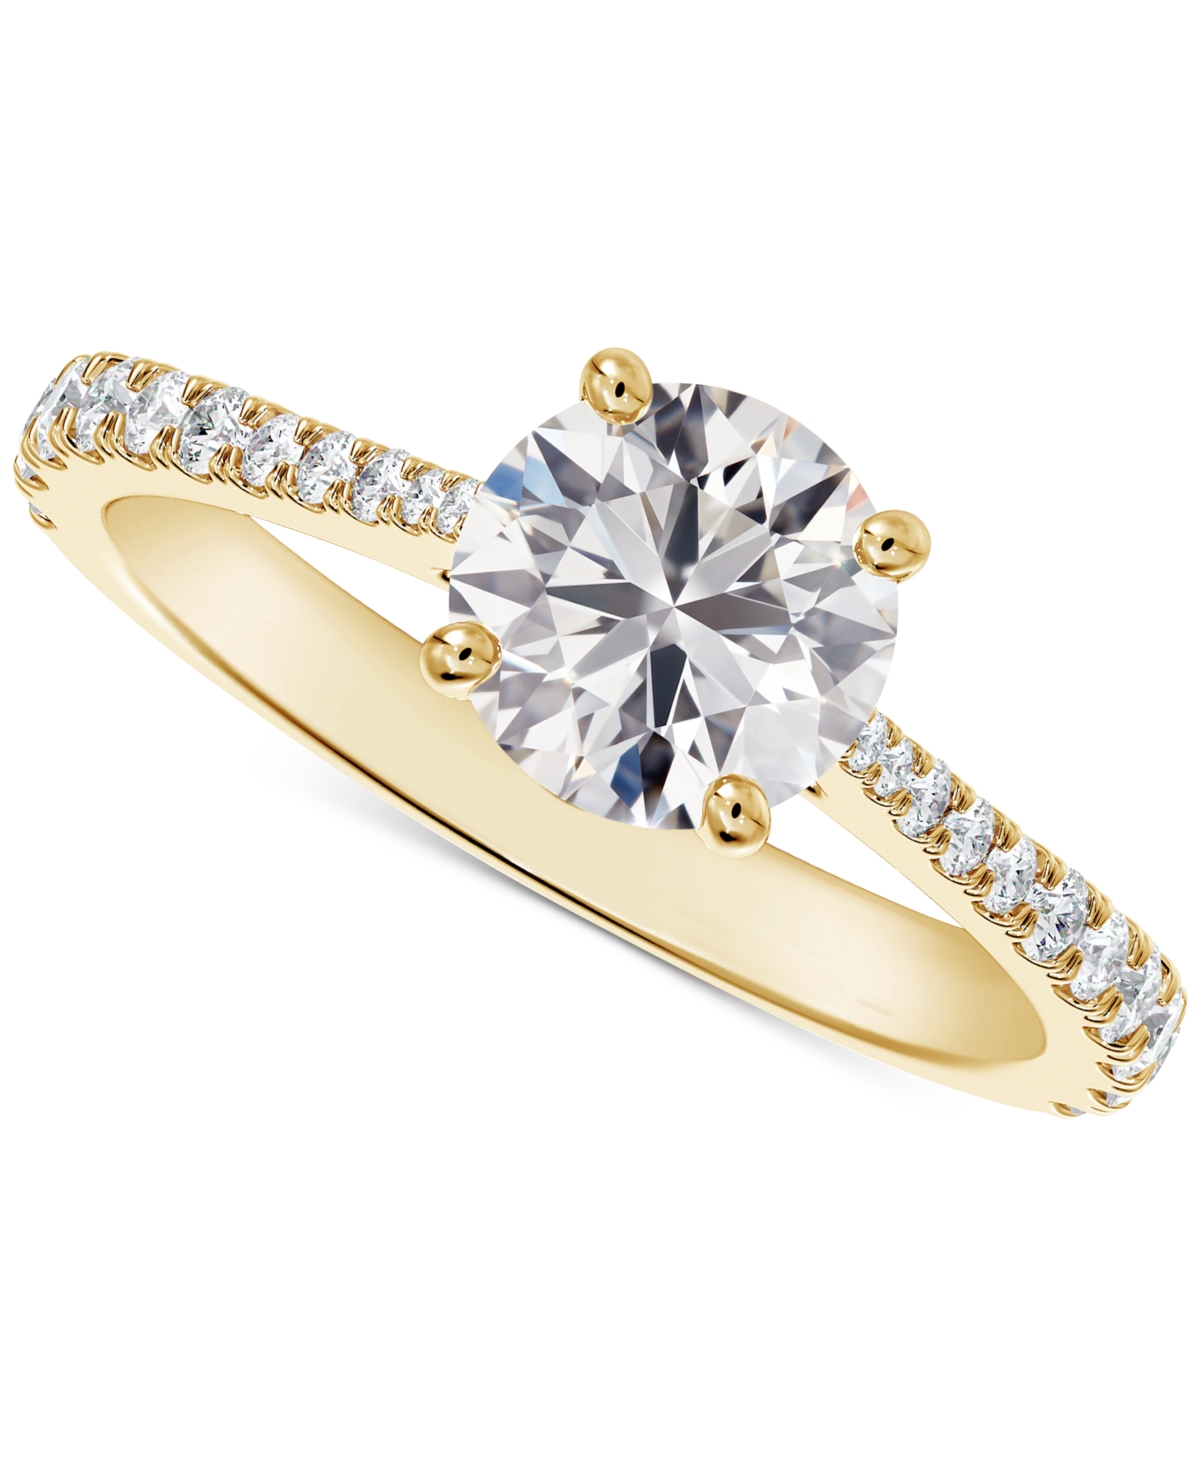 Portfolio by De Beers Forevermark Diamond Round-Cut Solitaire Tapered Pave Engagement Ring (1-1/10 ct. t.w.) in 14k Gold - Yellow Gold